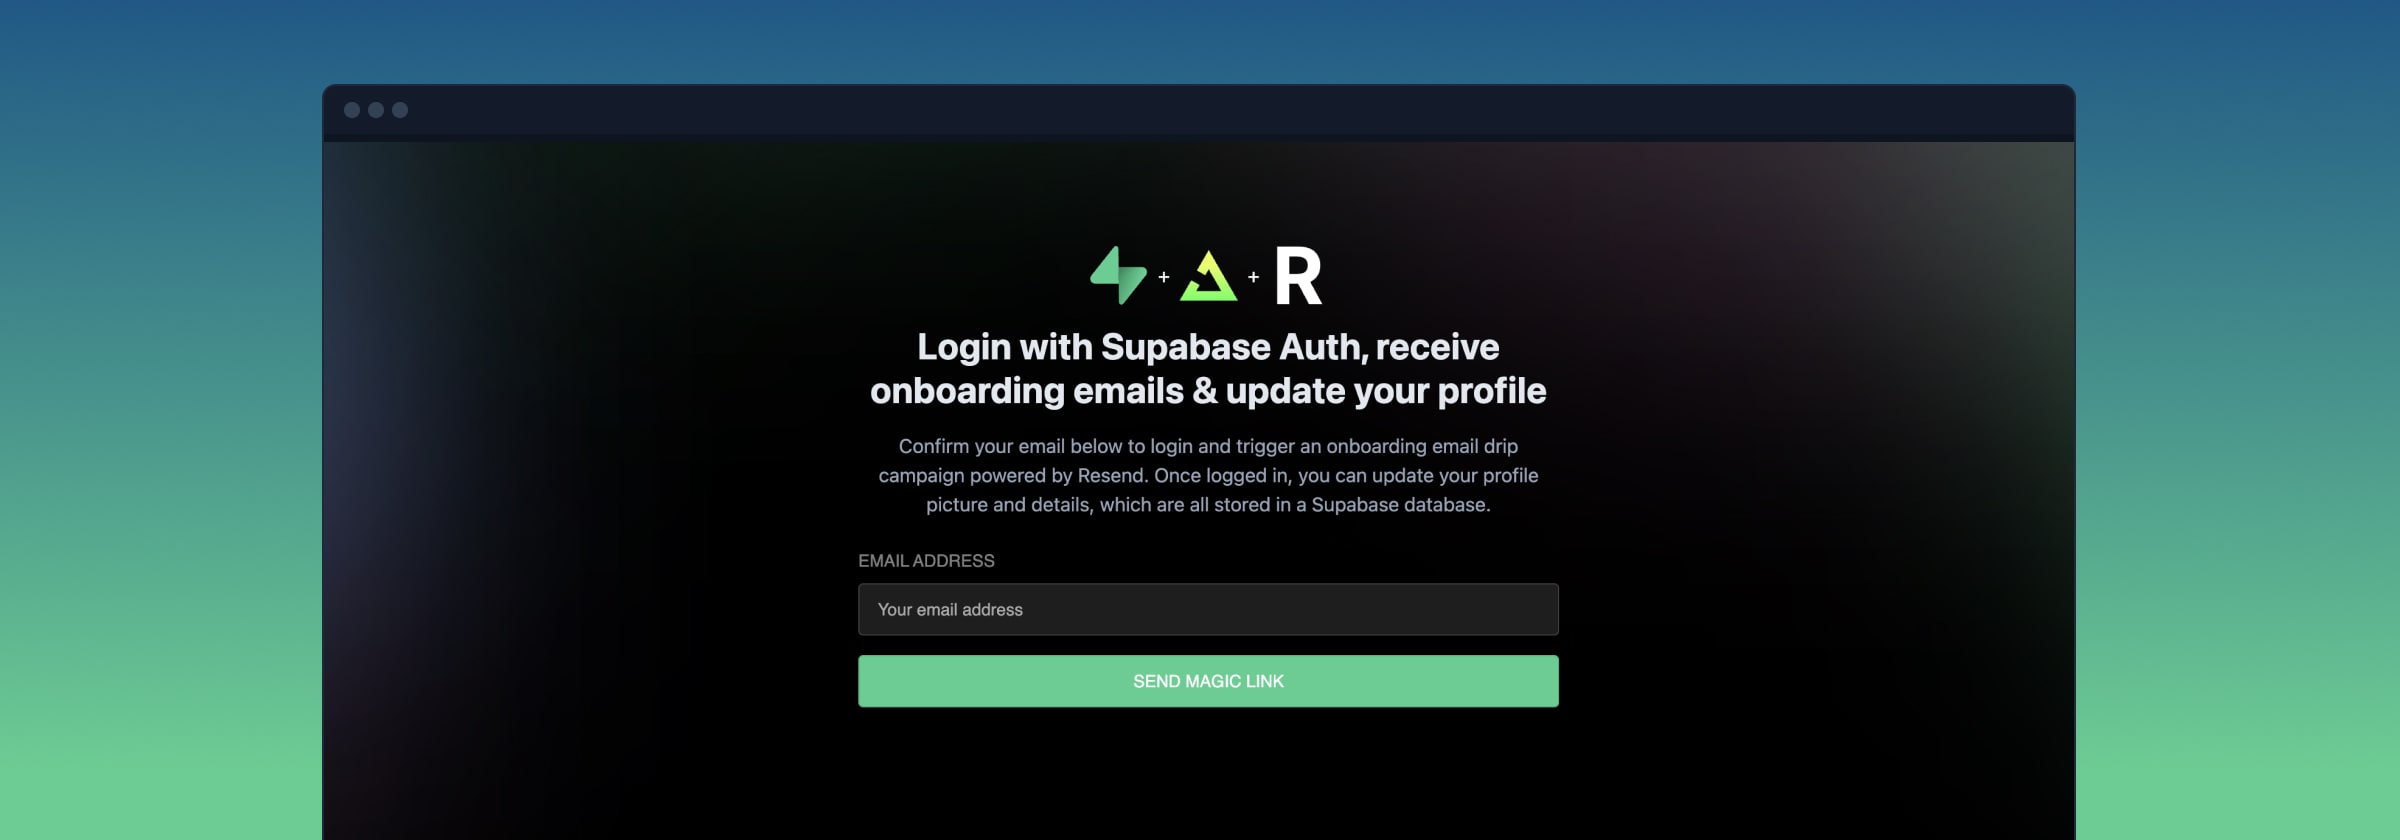 Login with Supabase Auth, send onboarding emails and store user details